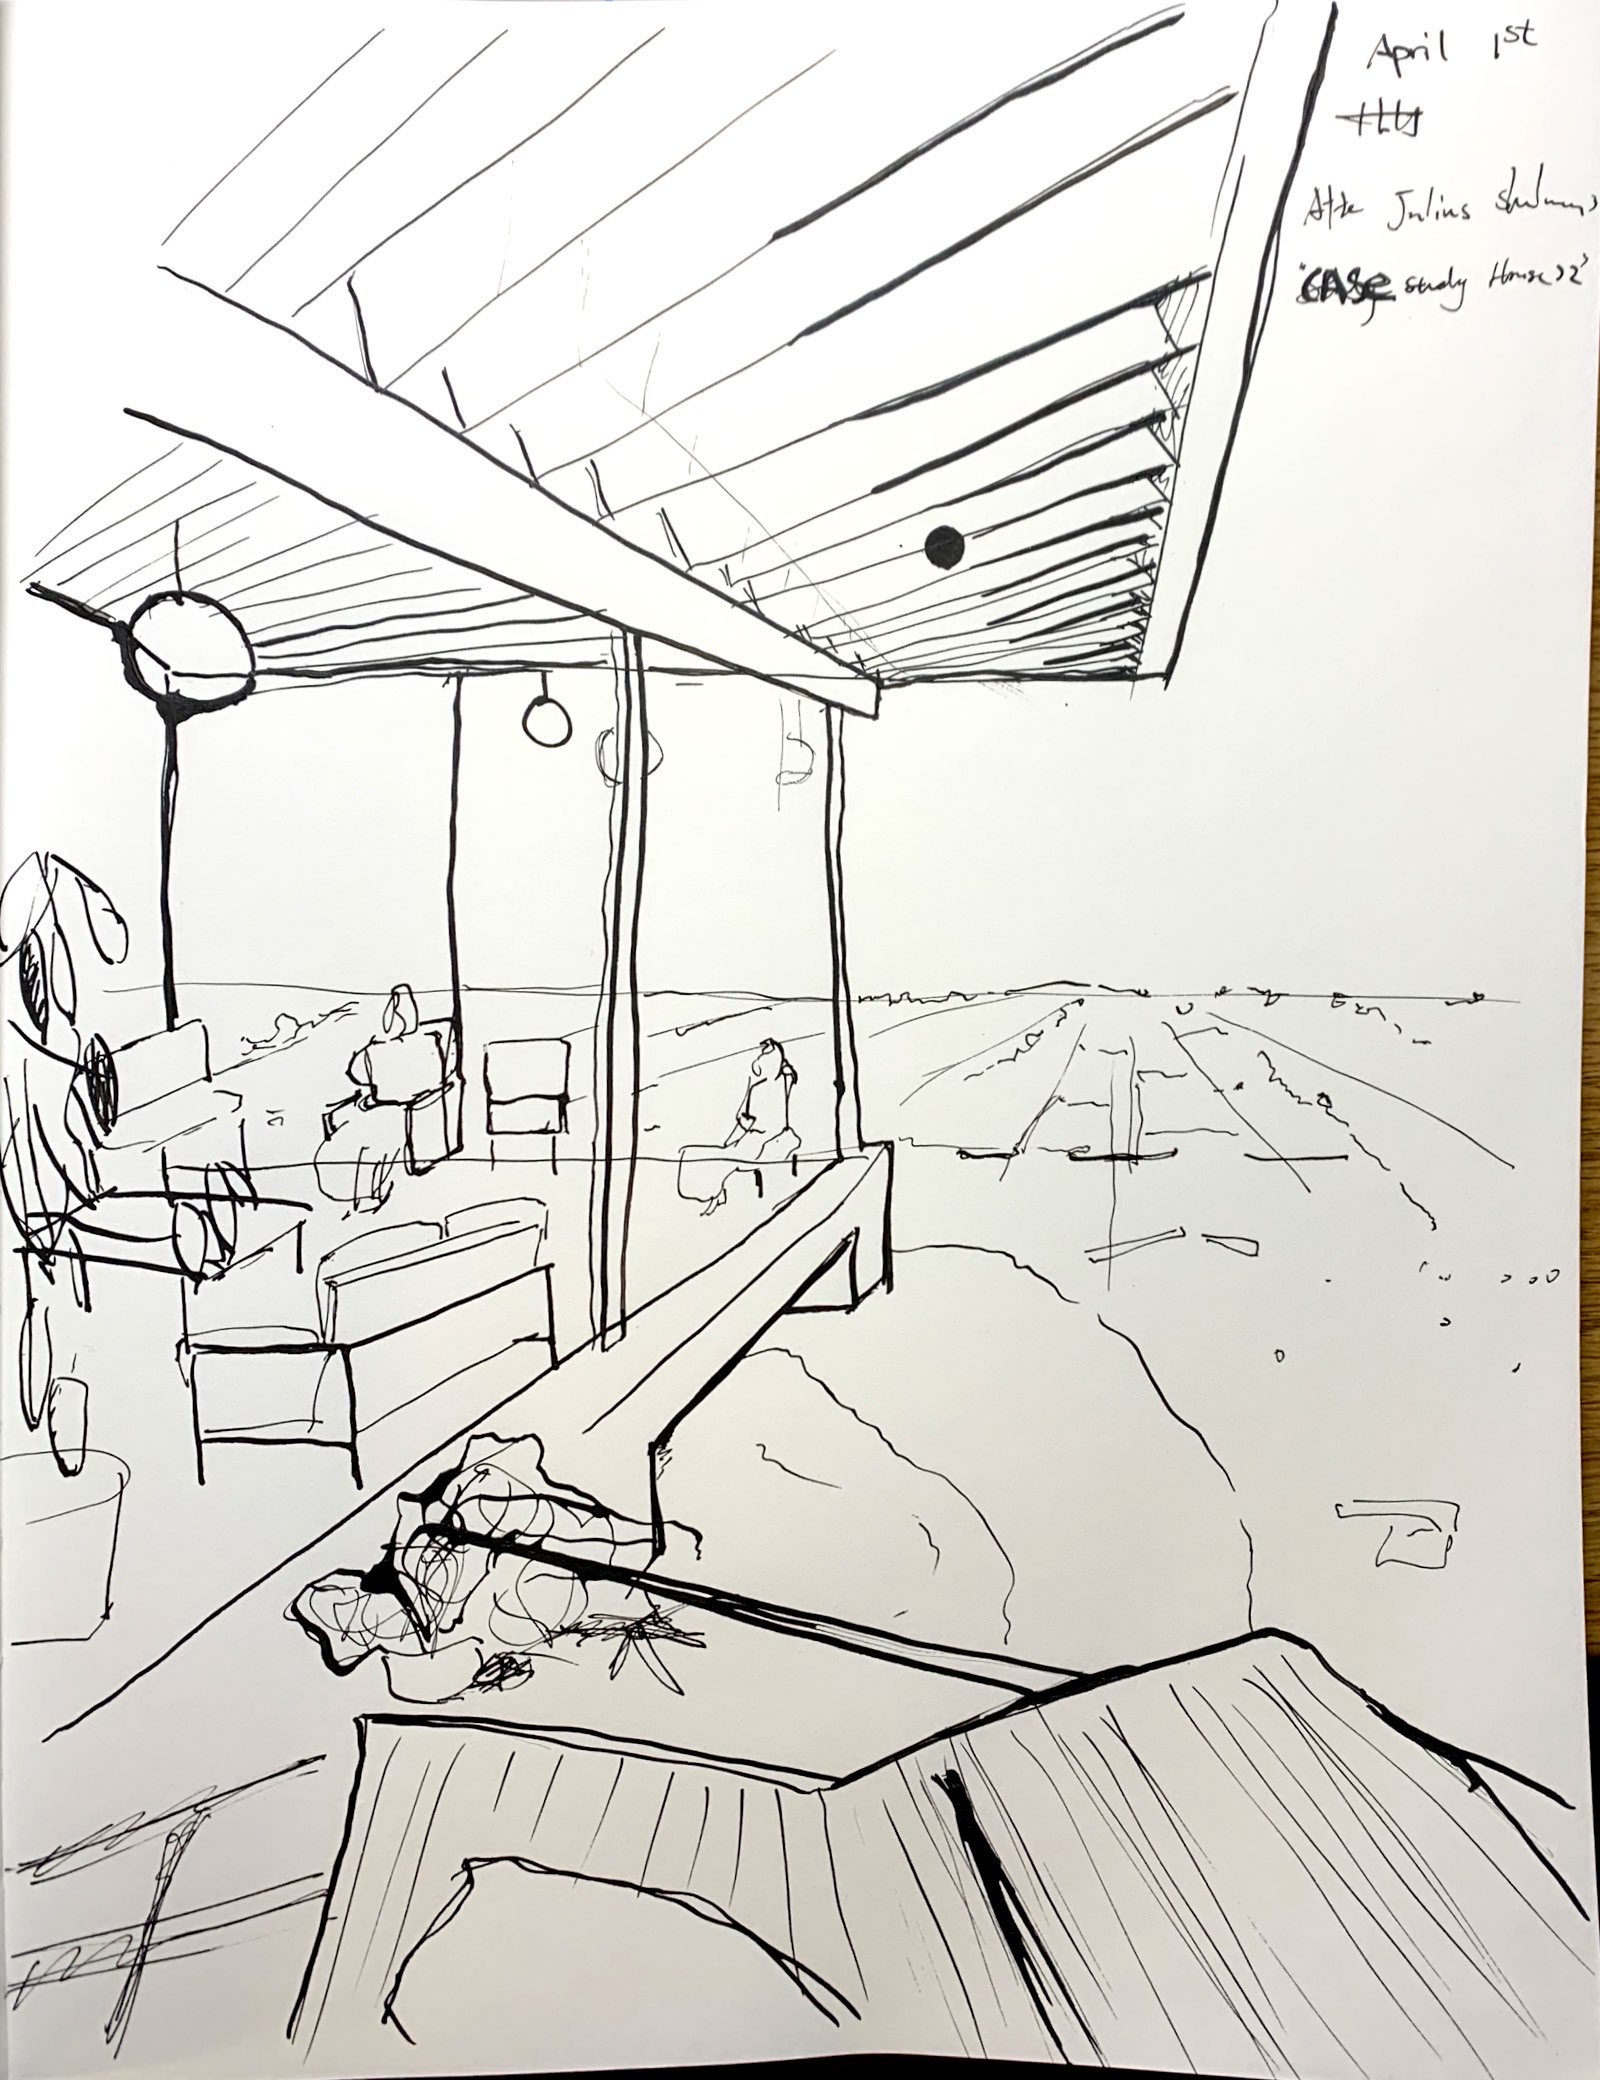 Drawing of "Case Study House 22""